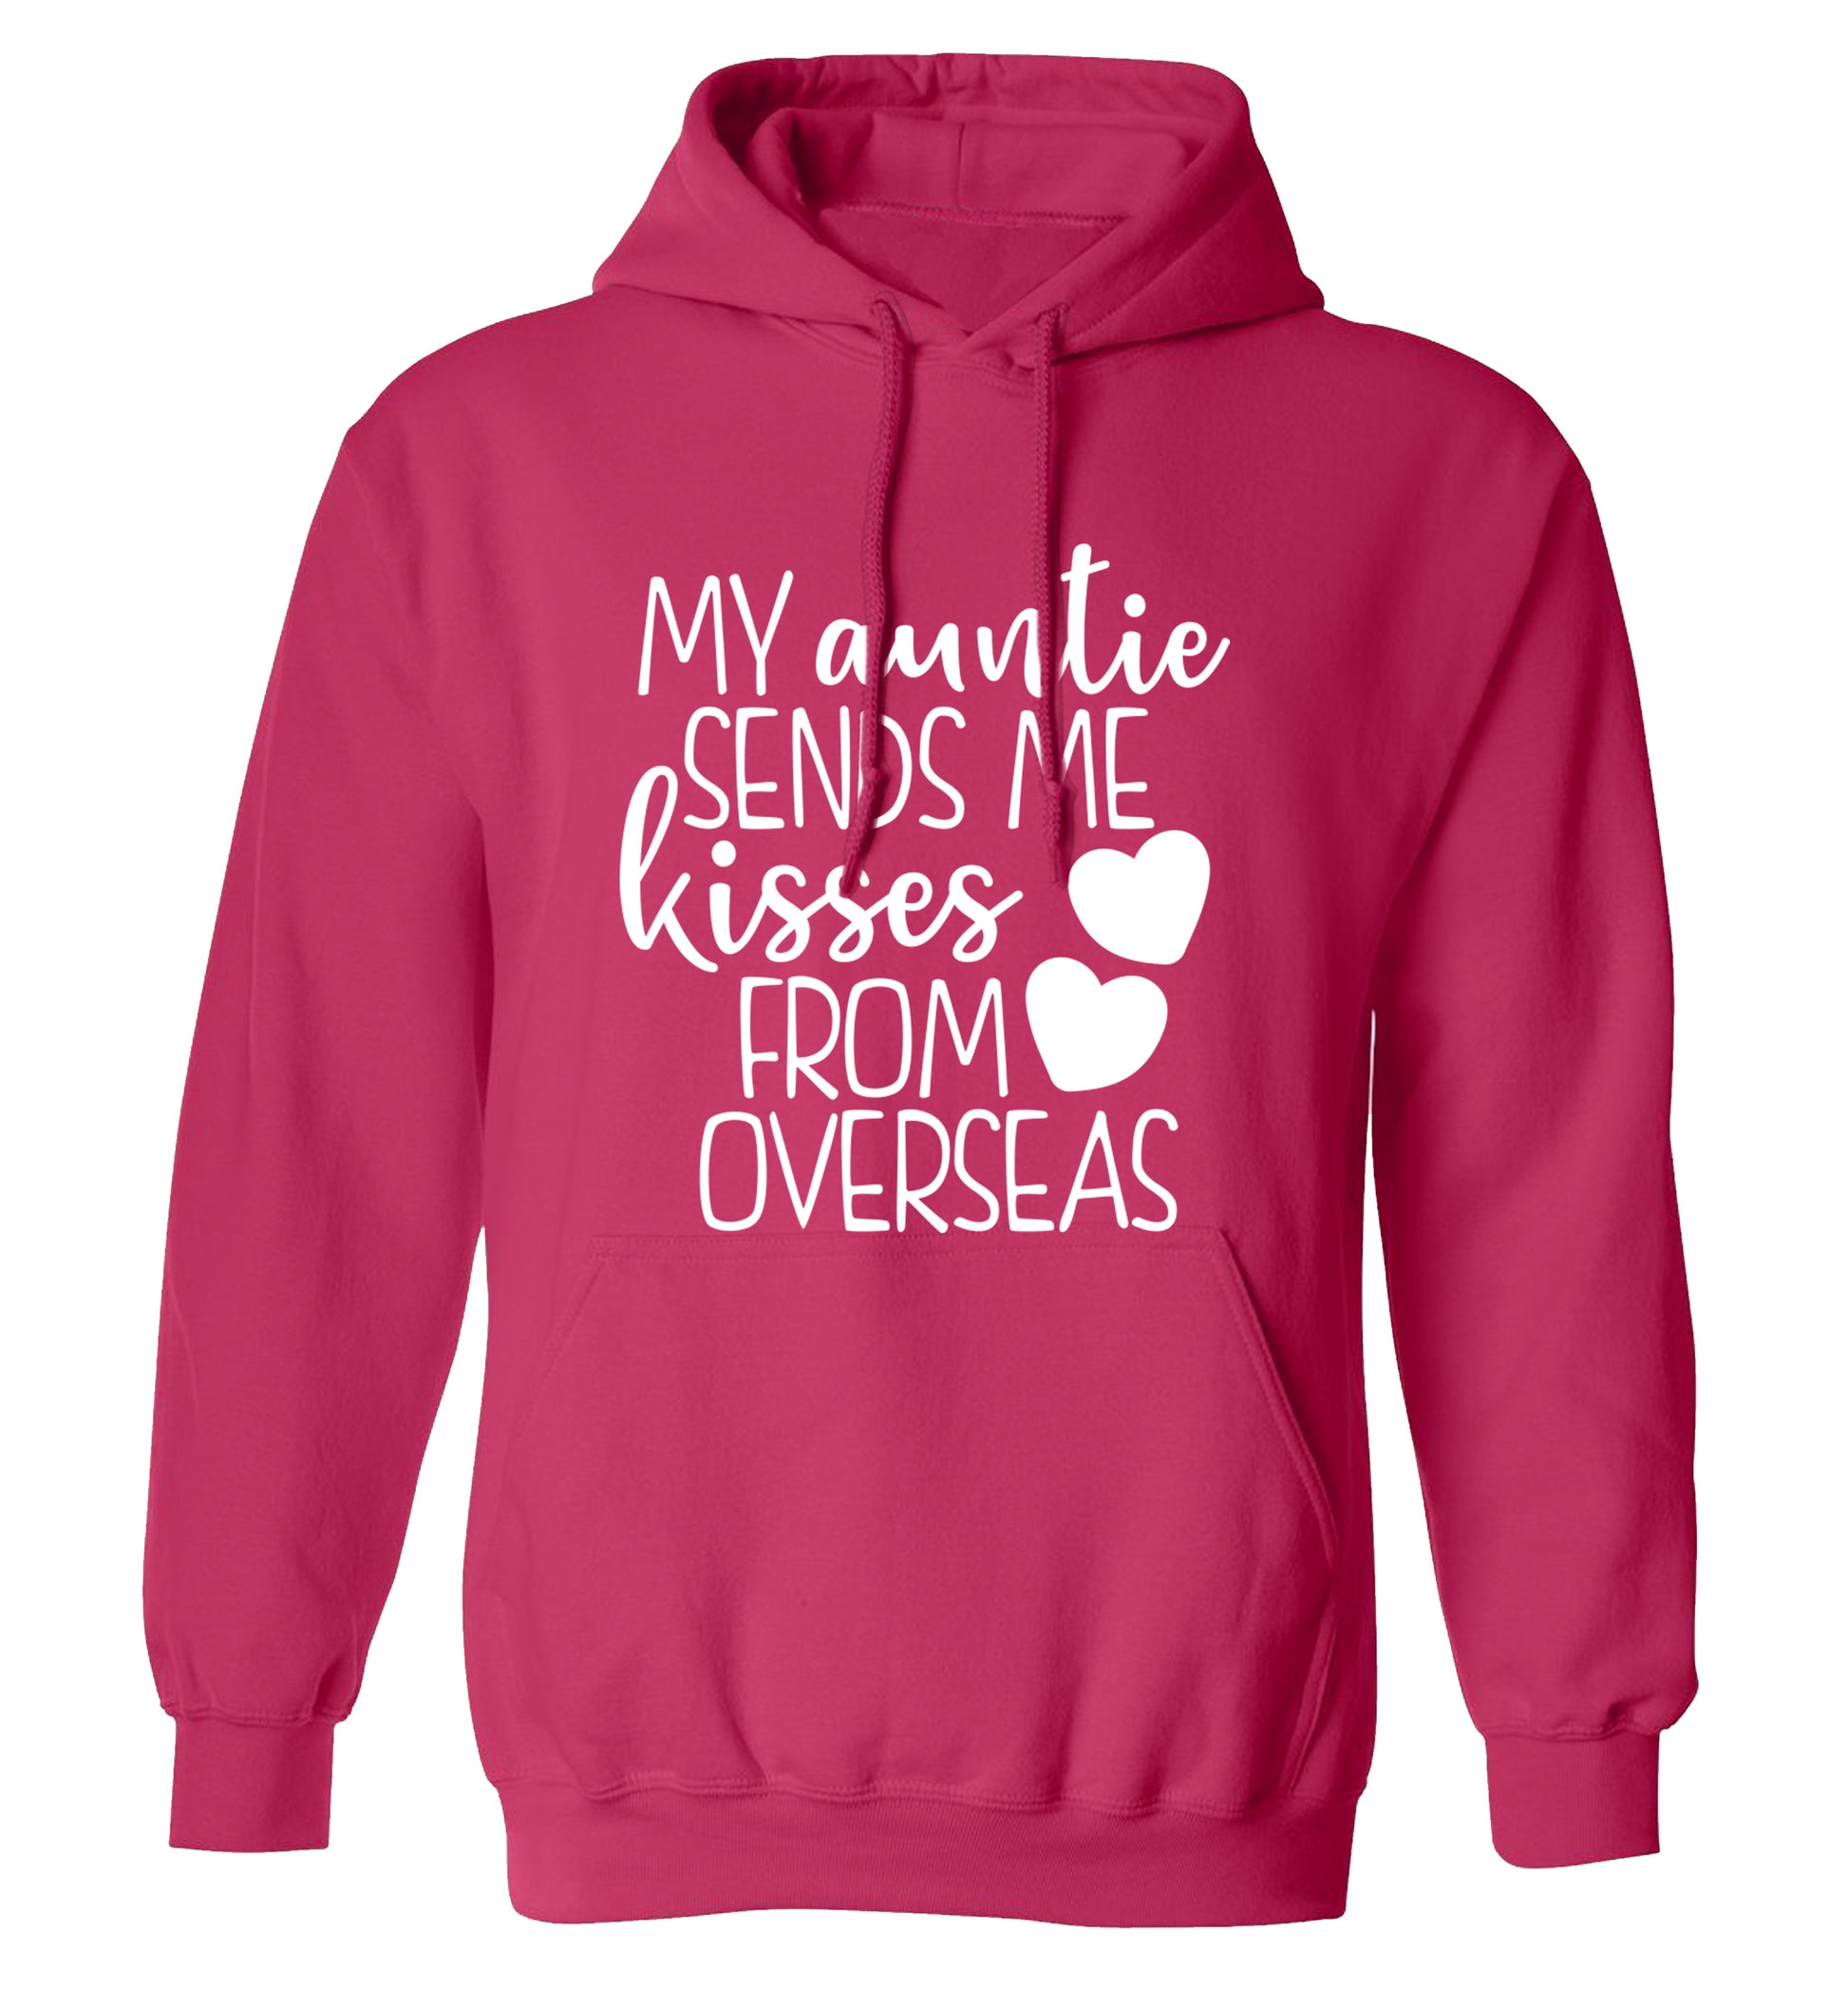 My auntie sends me kisses from overseas adults unisex pink hoodie 2XL